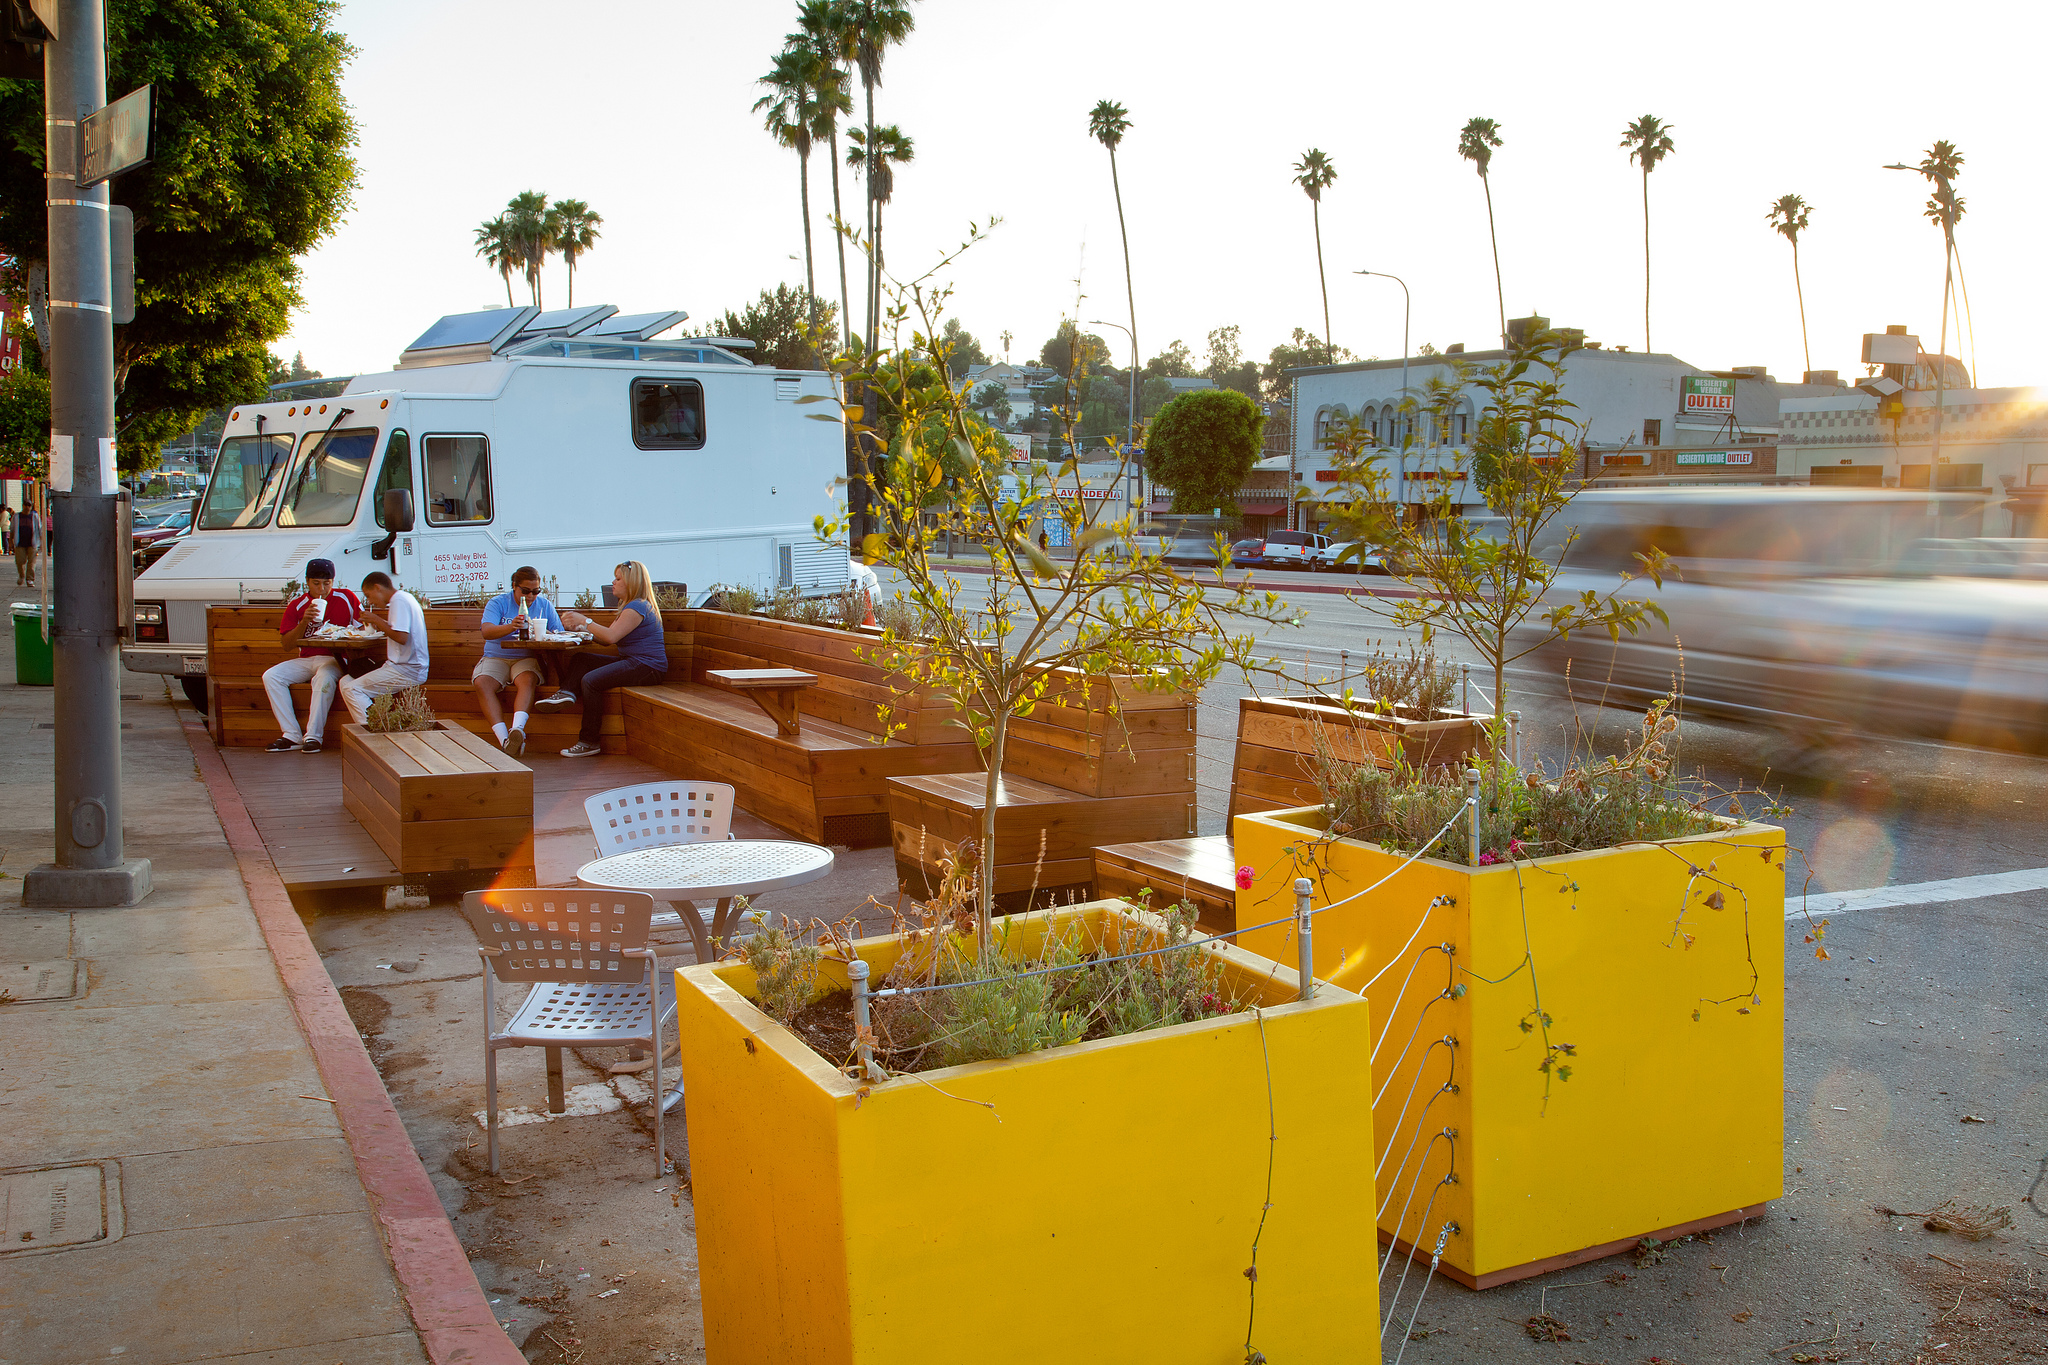 A wooden parklet with planters near a food truck in Los Angeles.